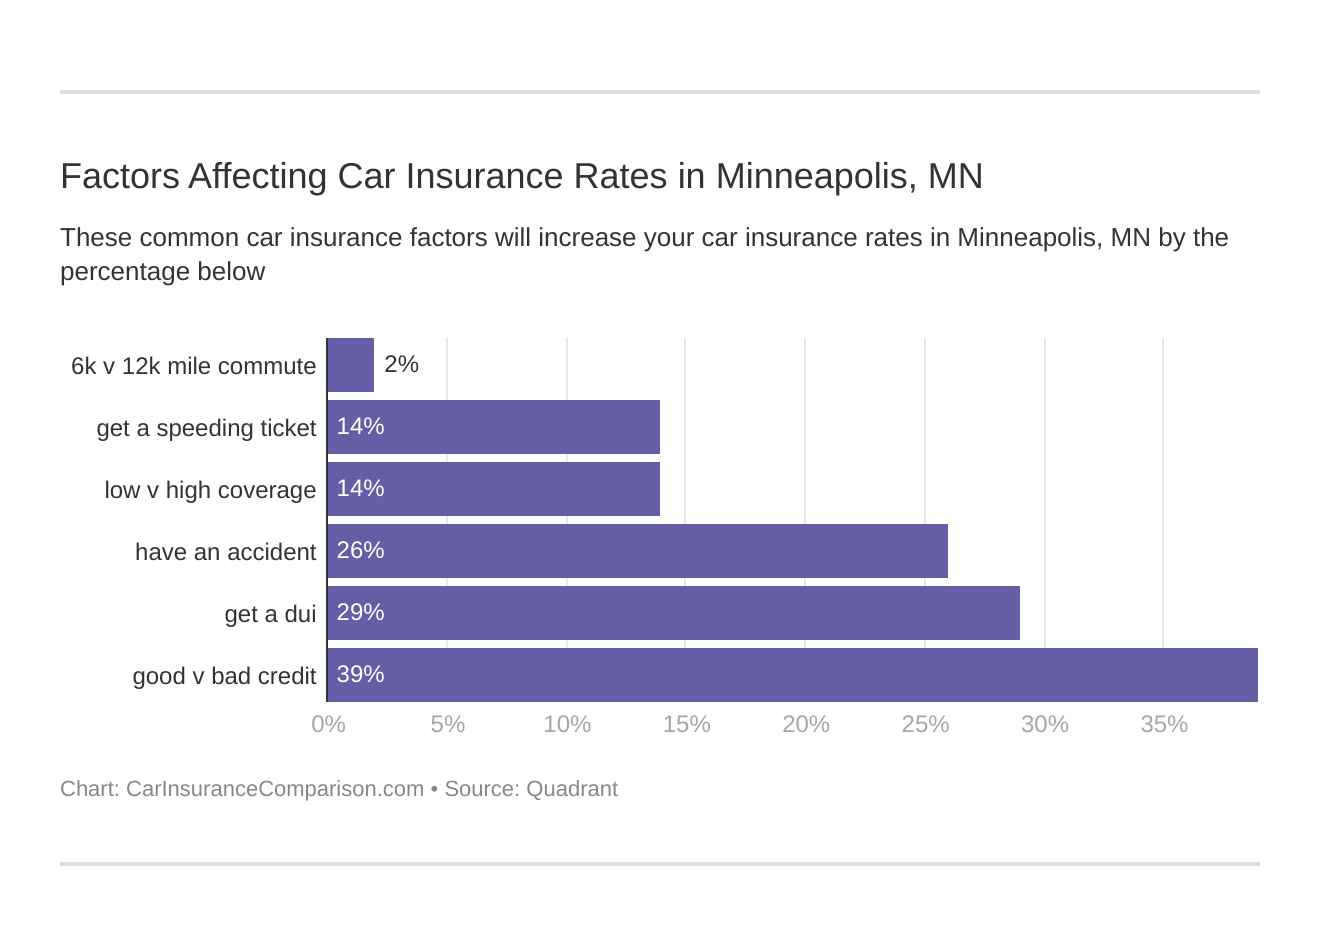 Factors Affecting Car Insurance Rates in Minneapolis, MN